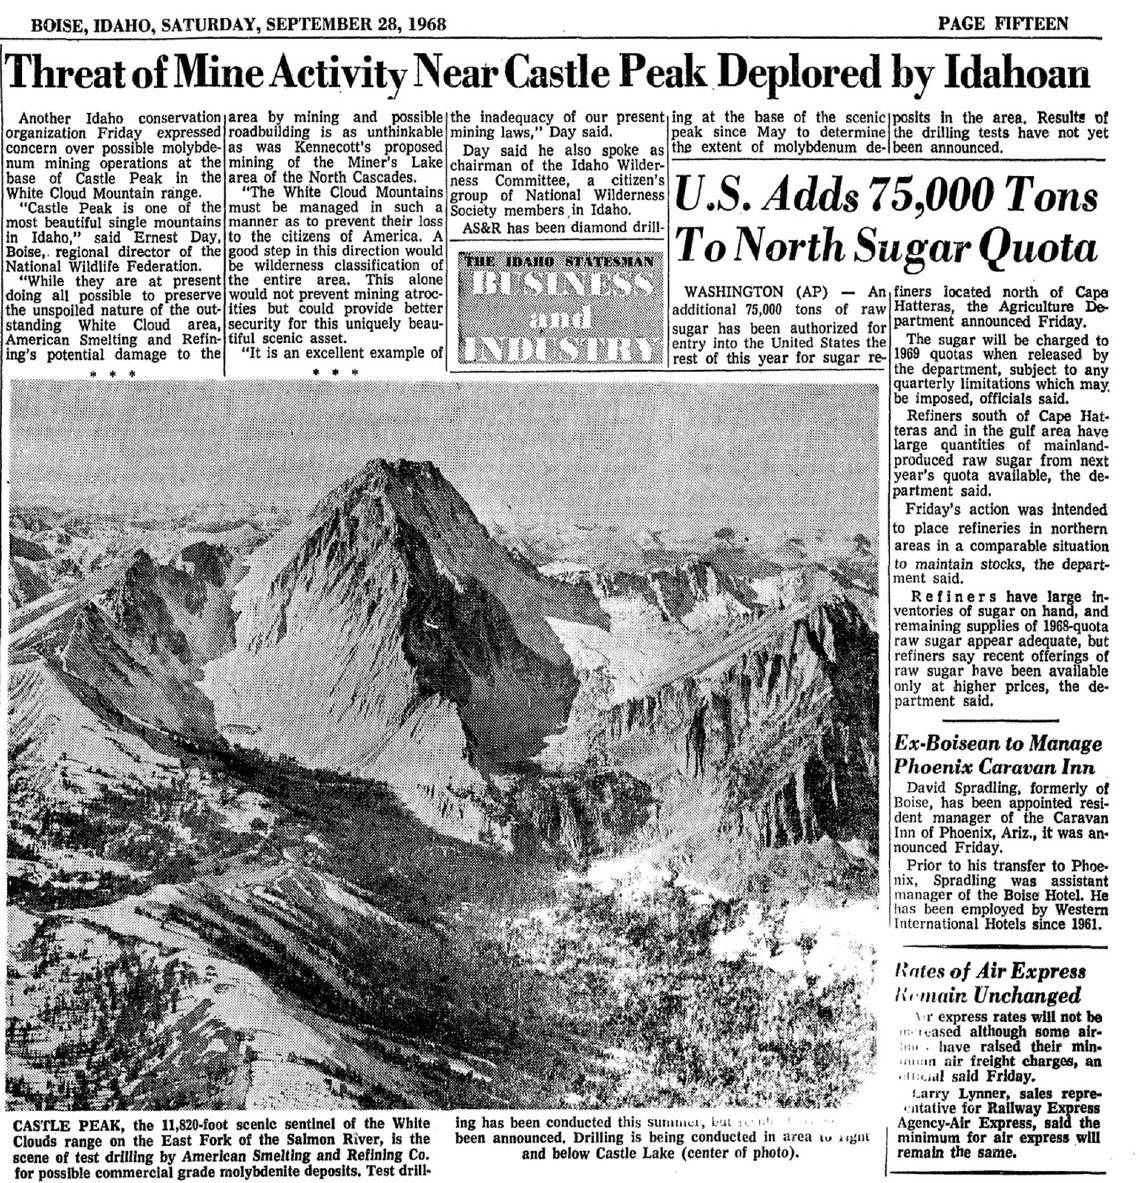 1968 Idaho Statesman article on mining in the White Clouds.